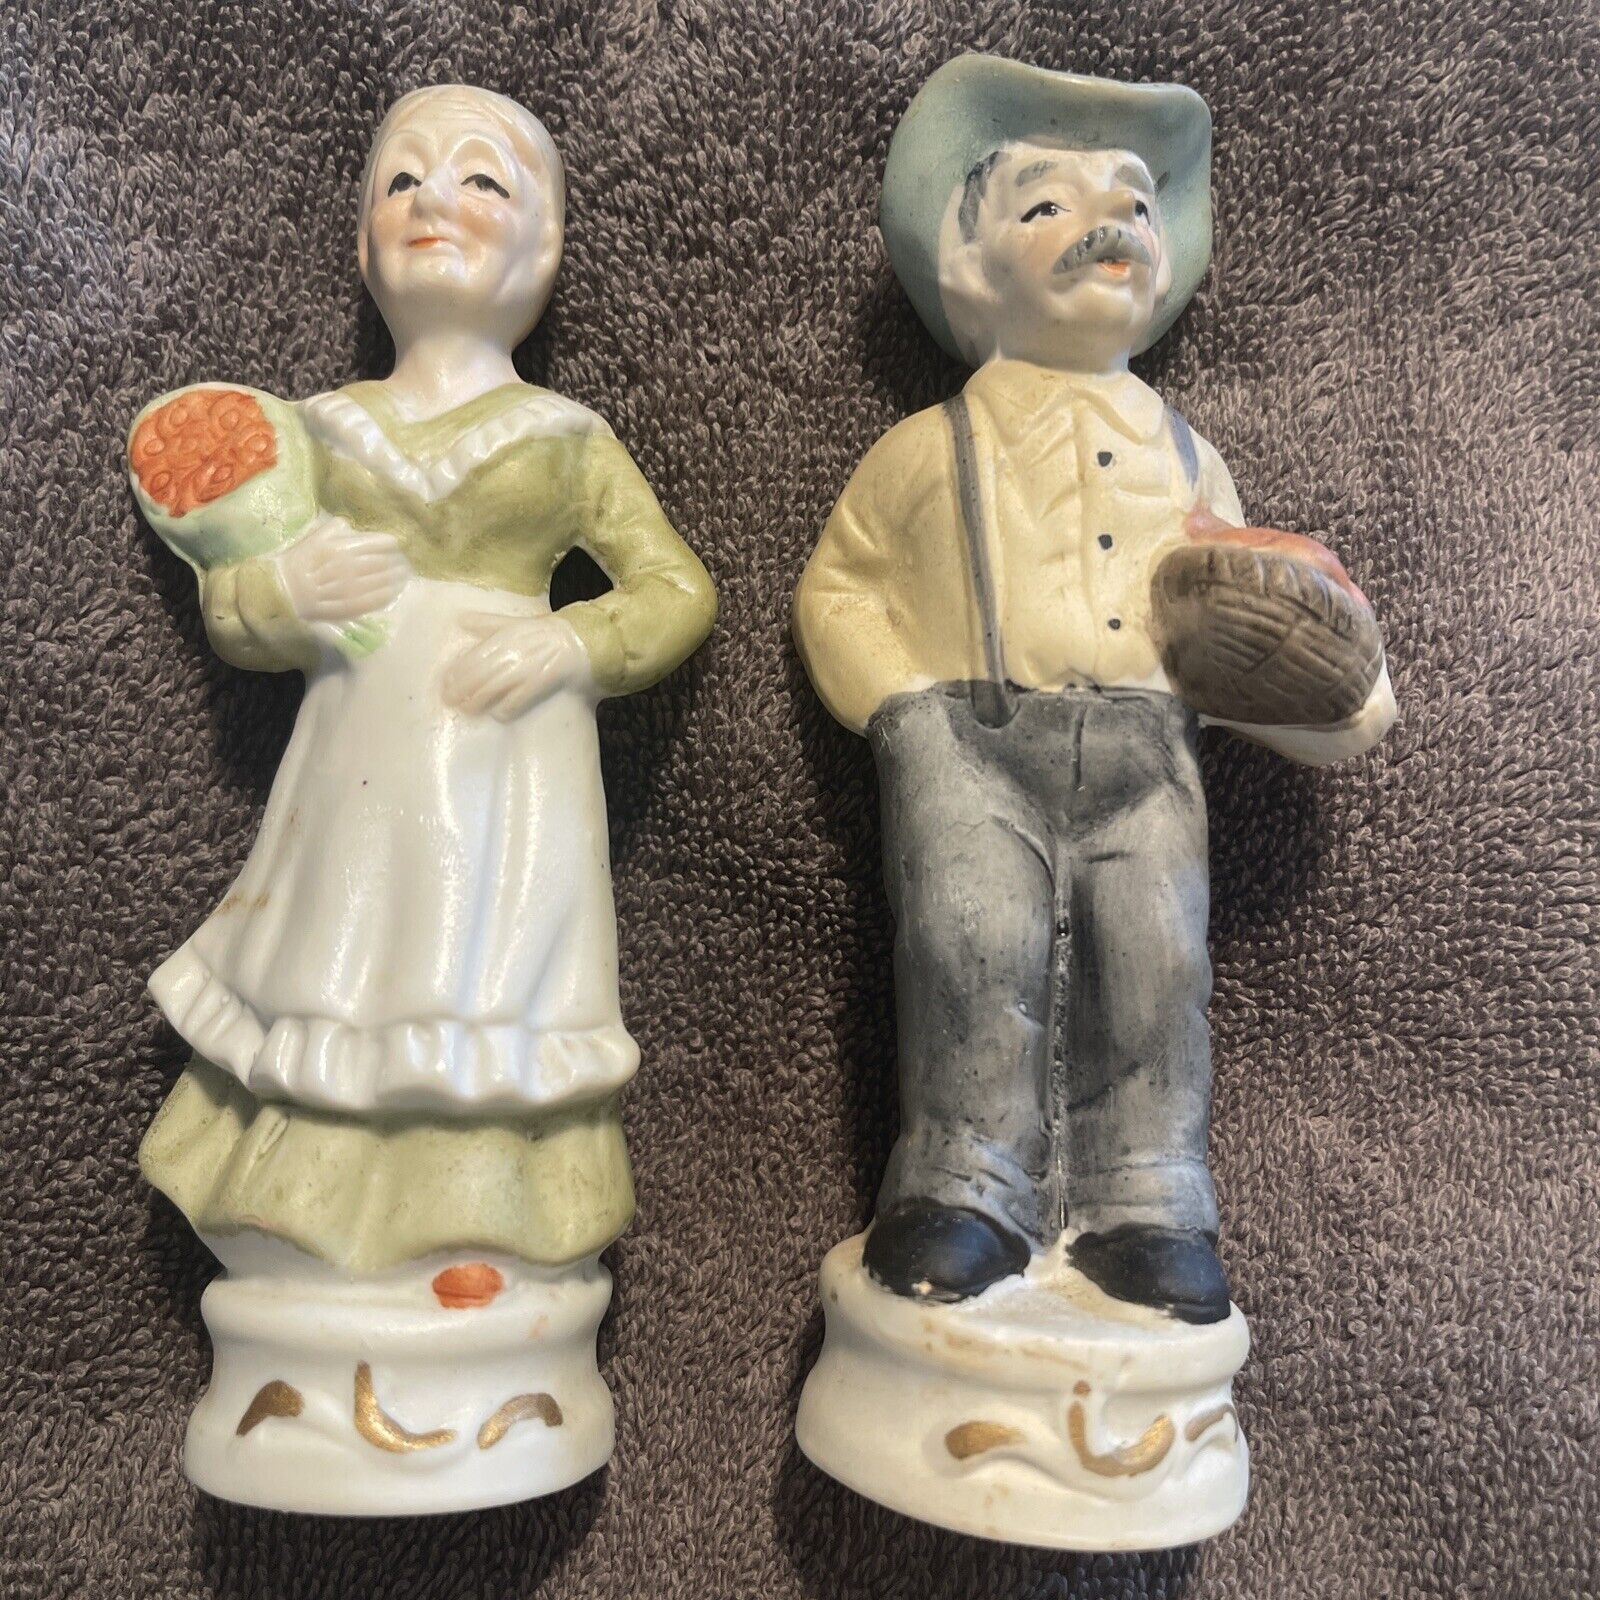 Vintage Deville Old Man And Old Woman Pair With Bread Basket And Flowers 5” Tall